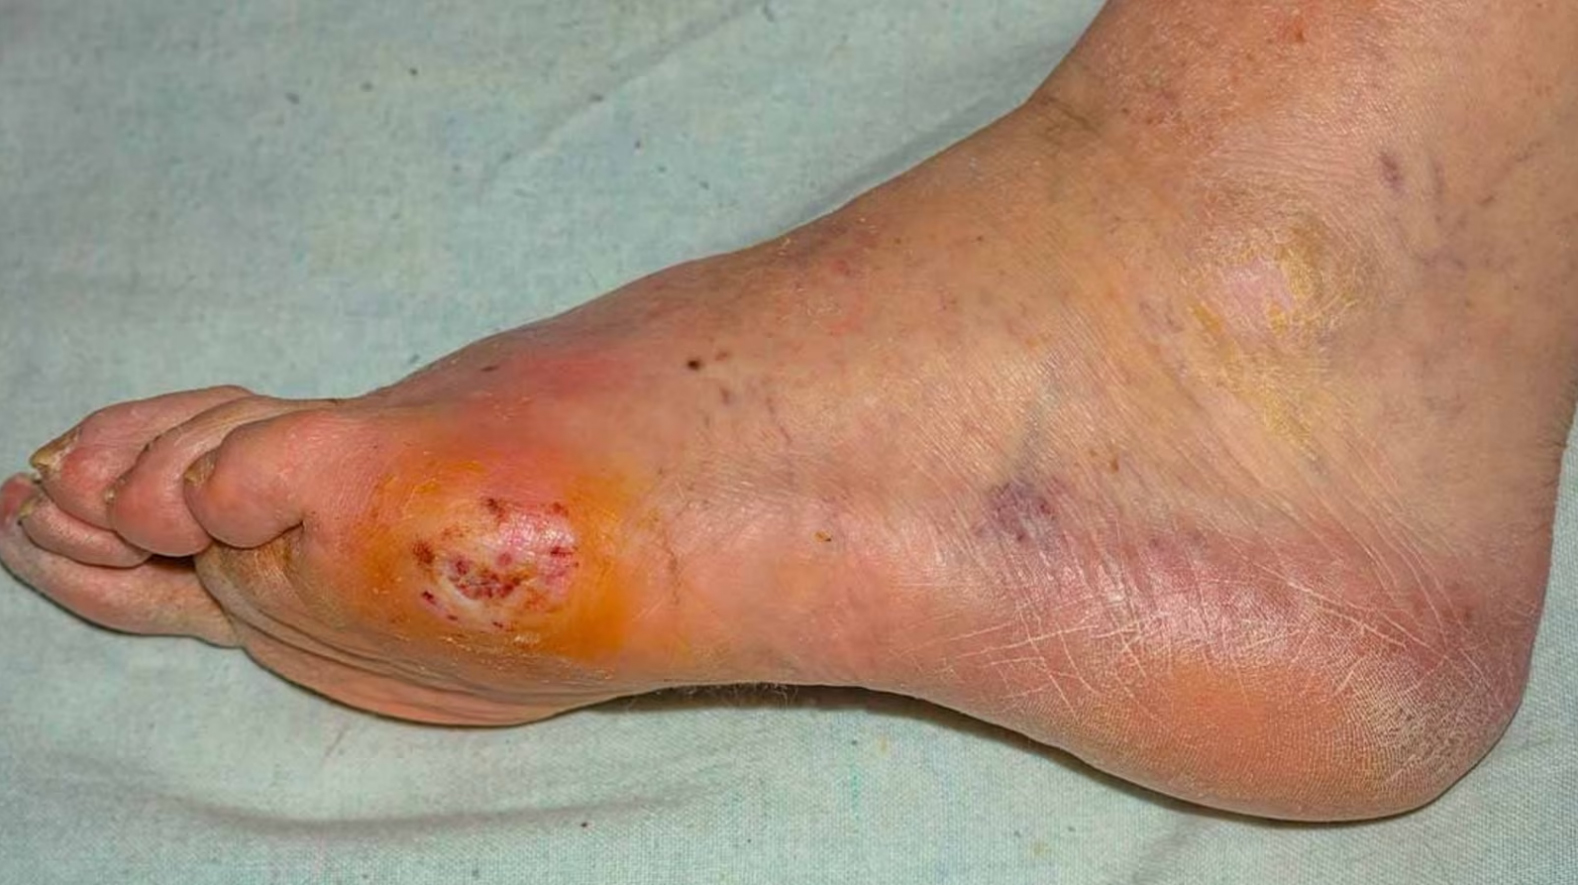 Diabetes – Foot sores and Infection